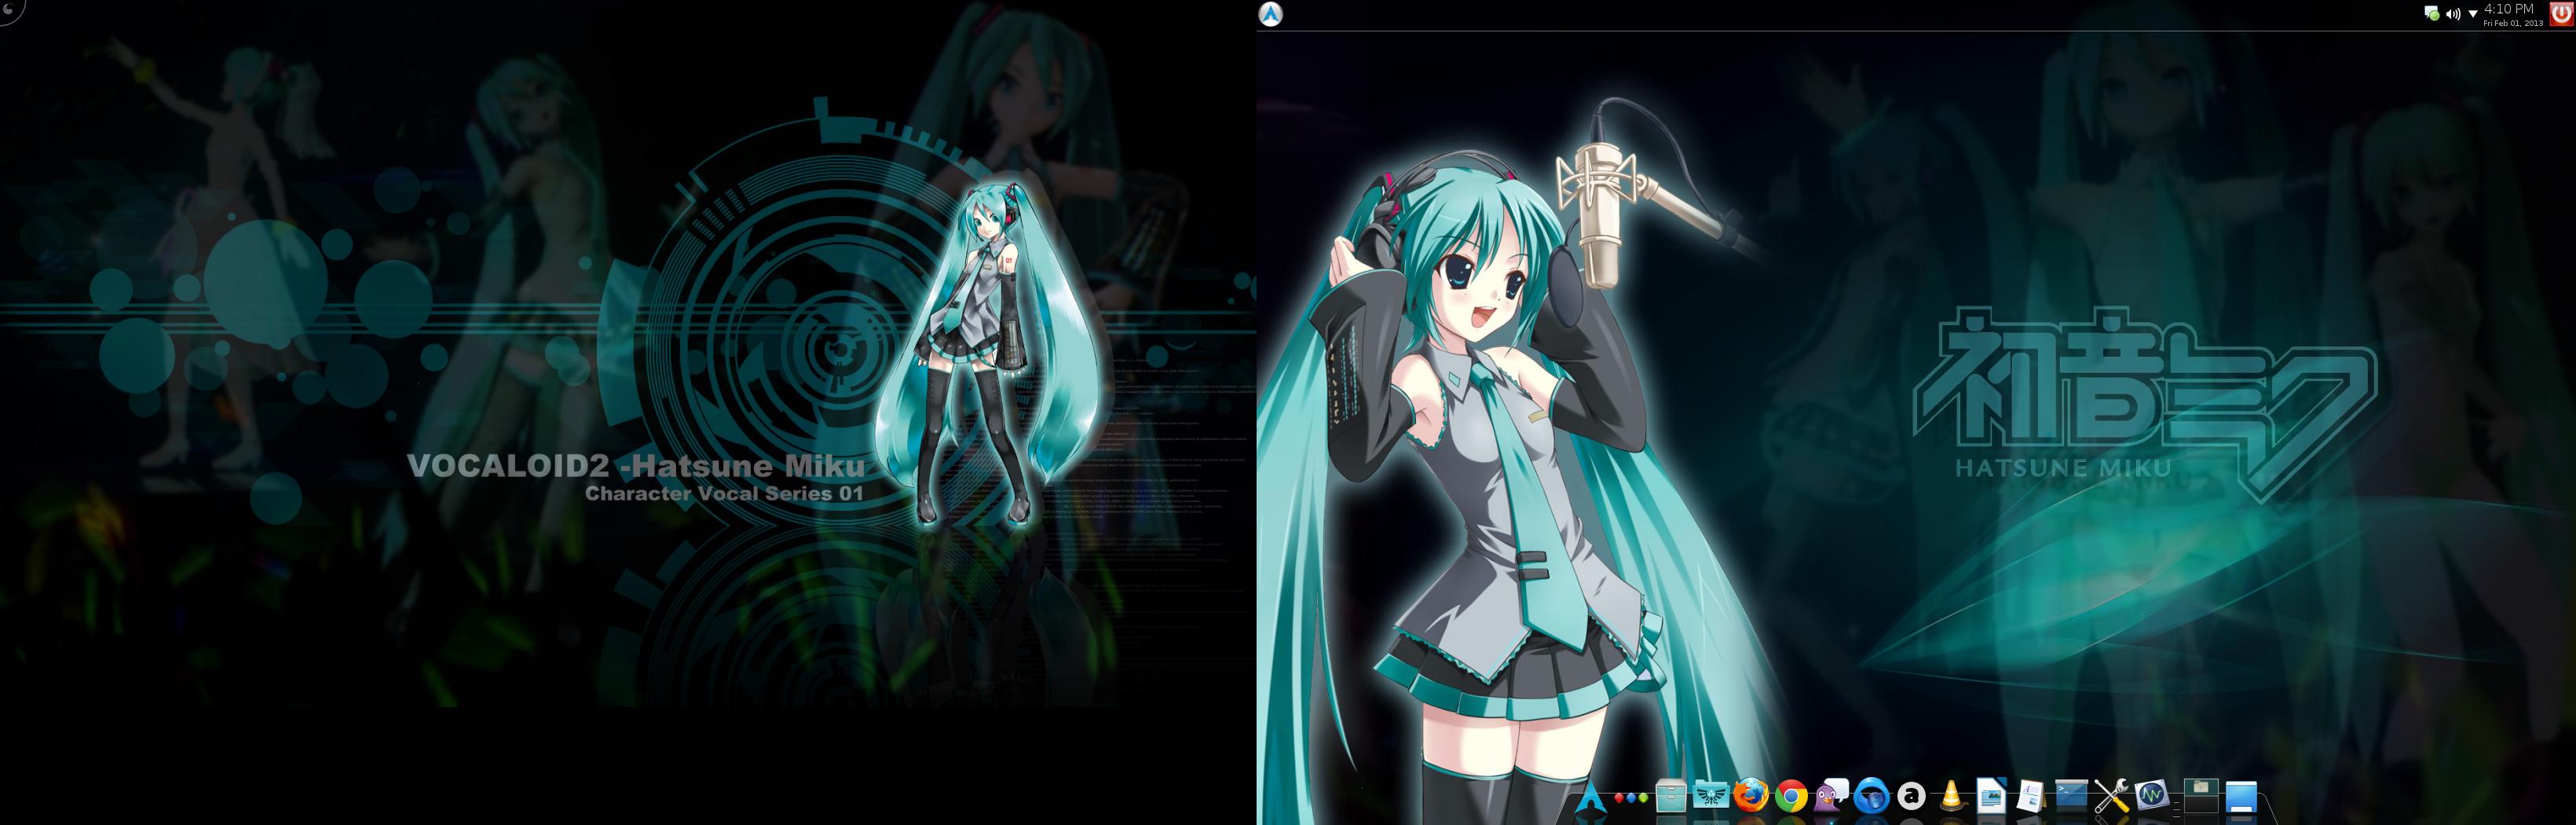 arch linux wallpaper anime